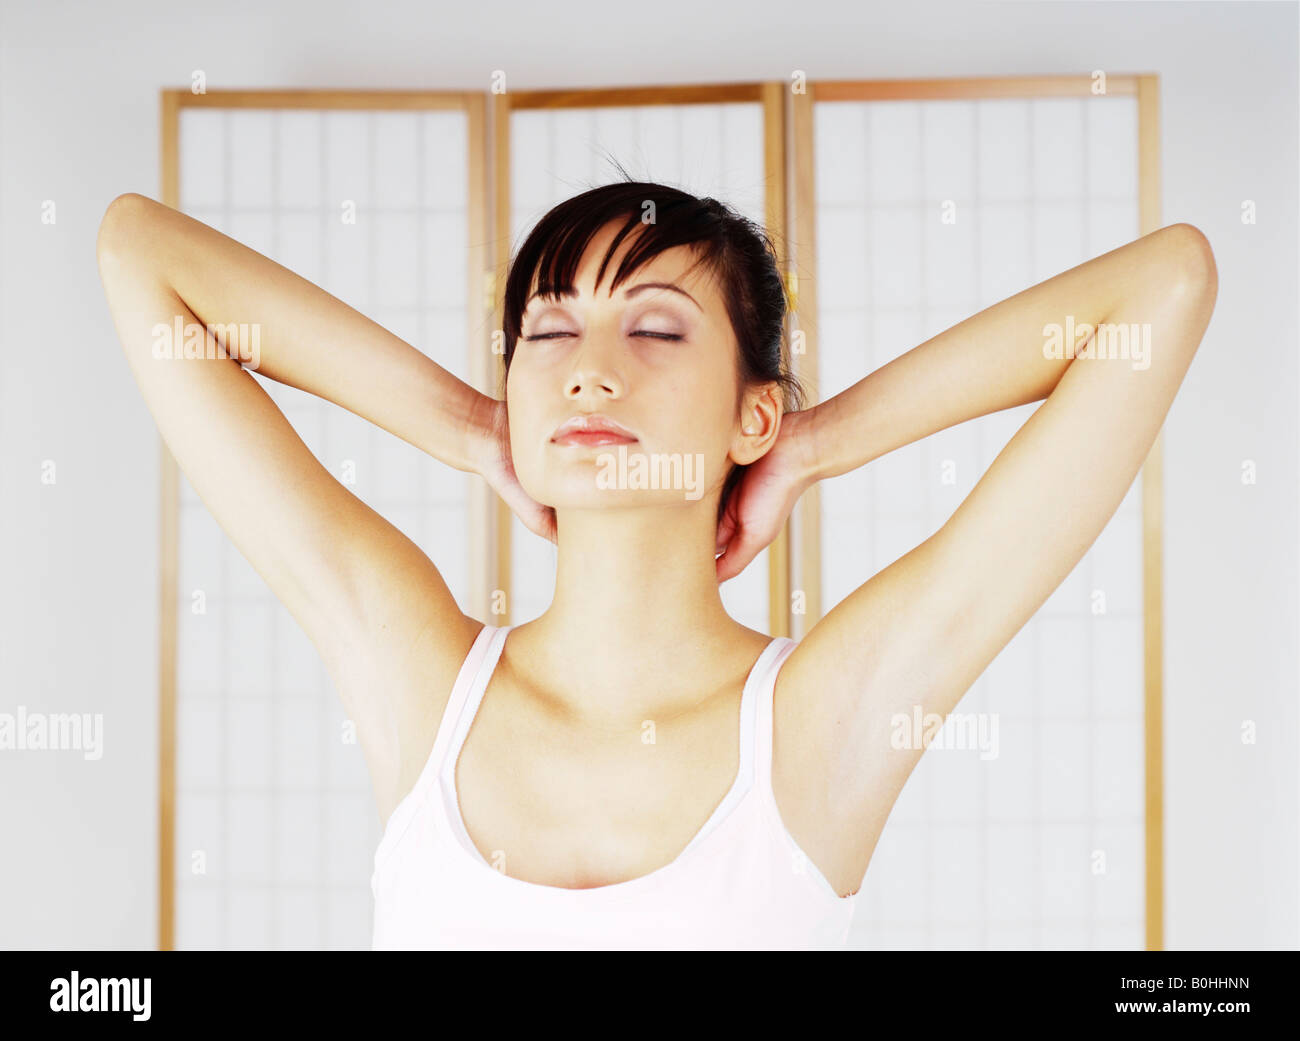 Young woman relaxing and meditating Stock Photo